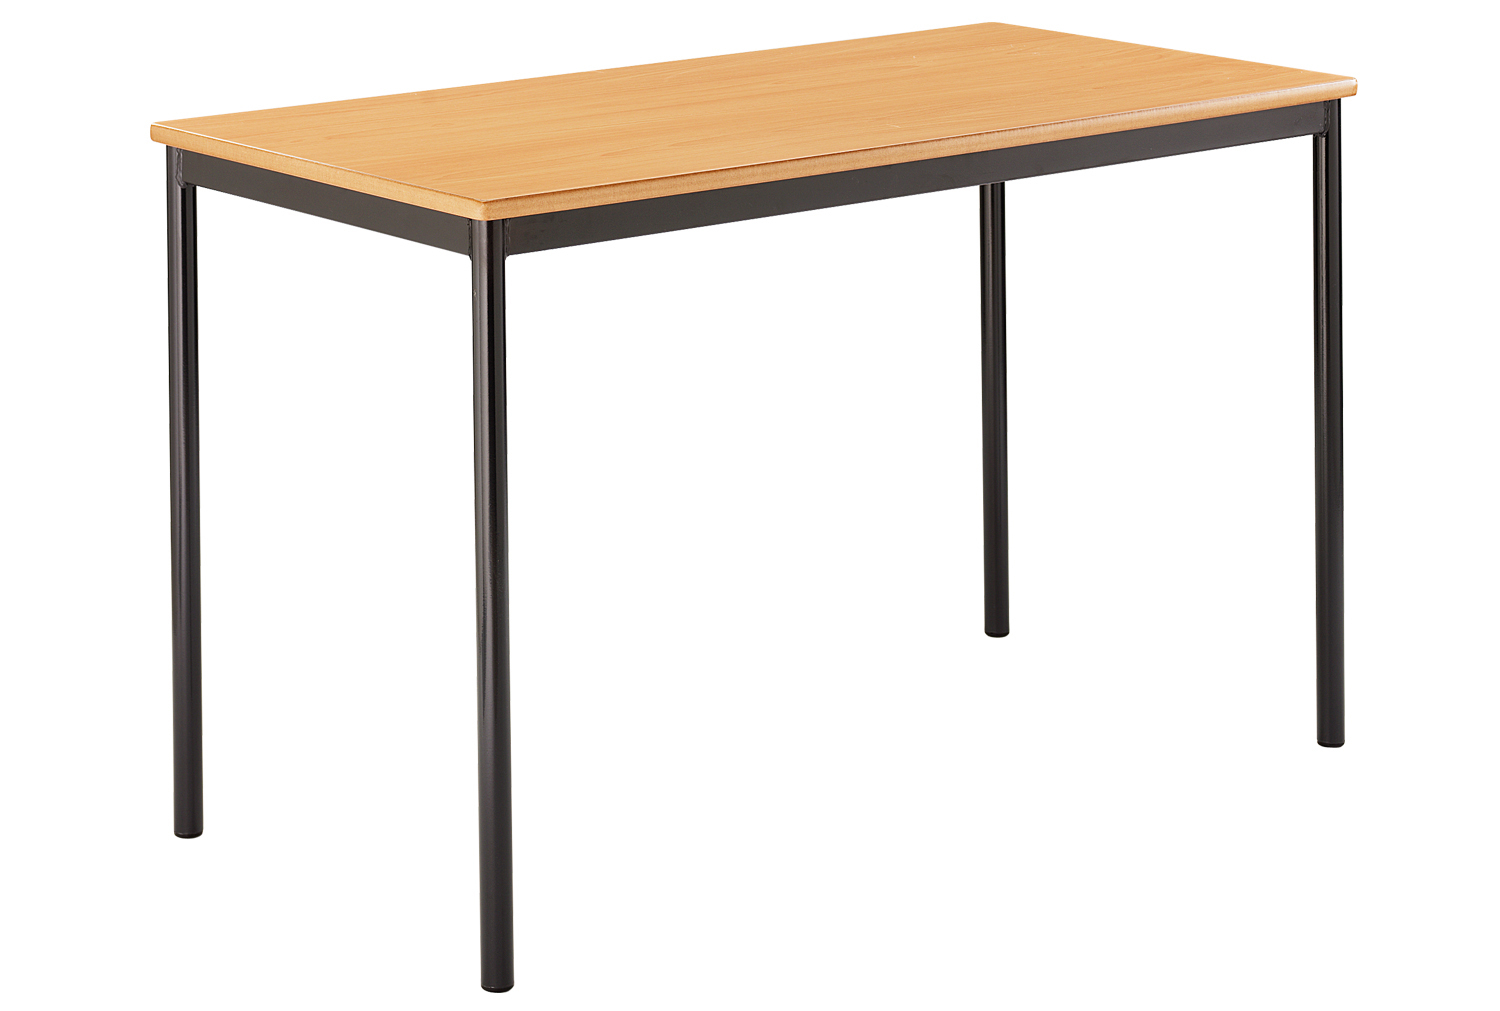 Qty 4 - Rectangular Fully Welded Classroom Tables 14+ Years, 120wx60dx76h (cm), Black Frame, Blue Top, ABS Grey Edge